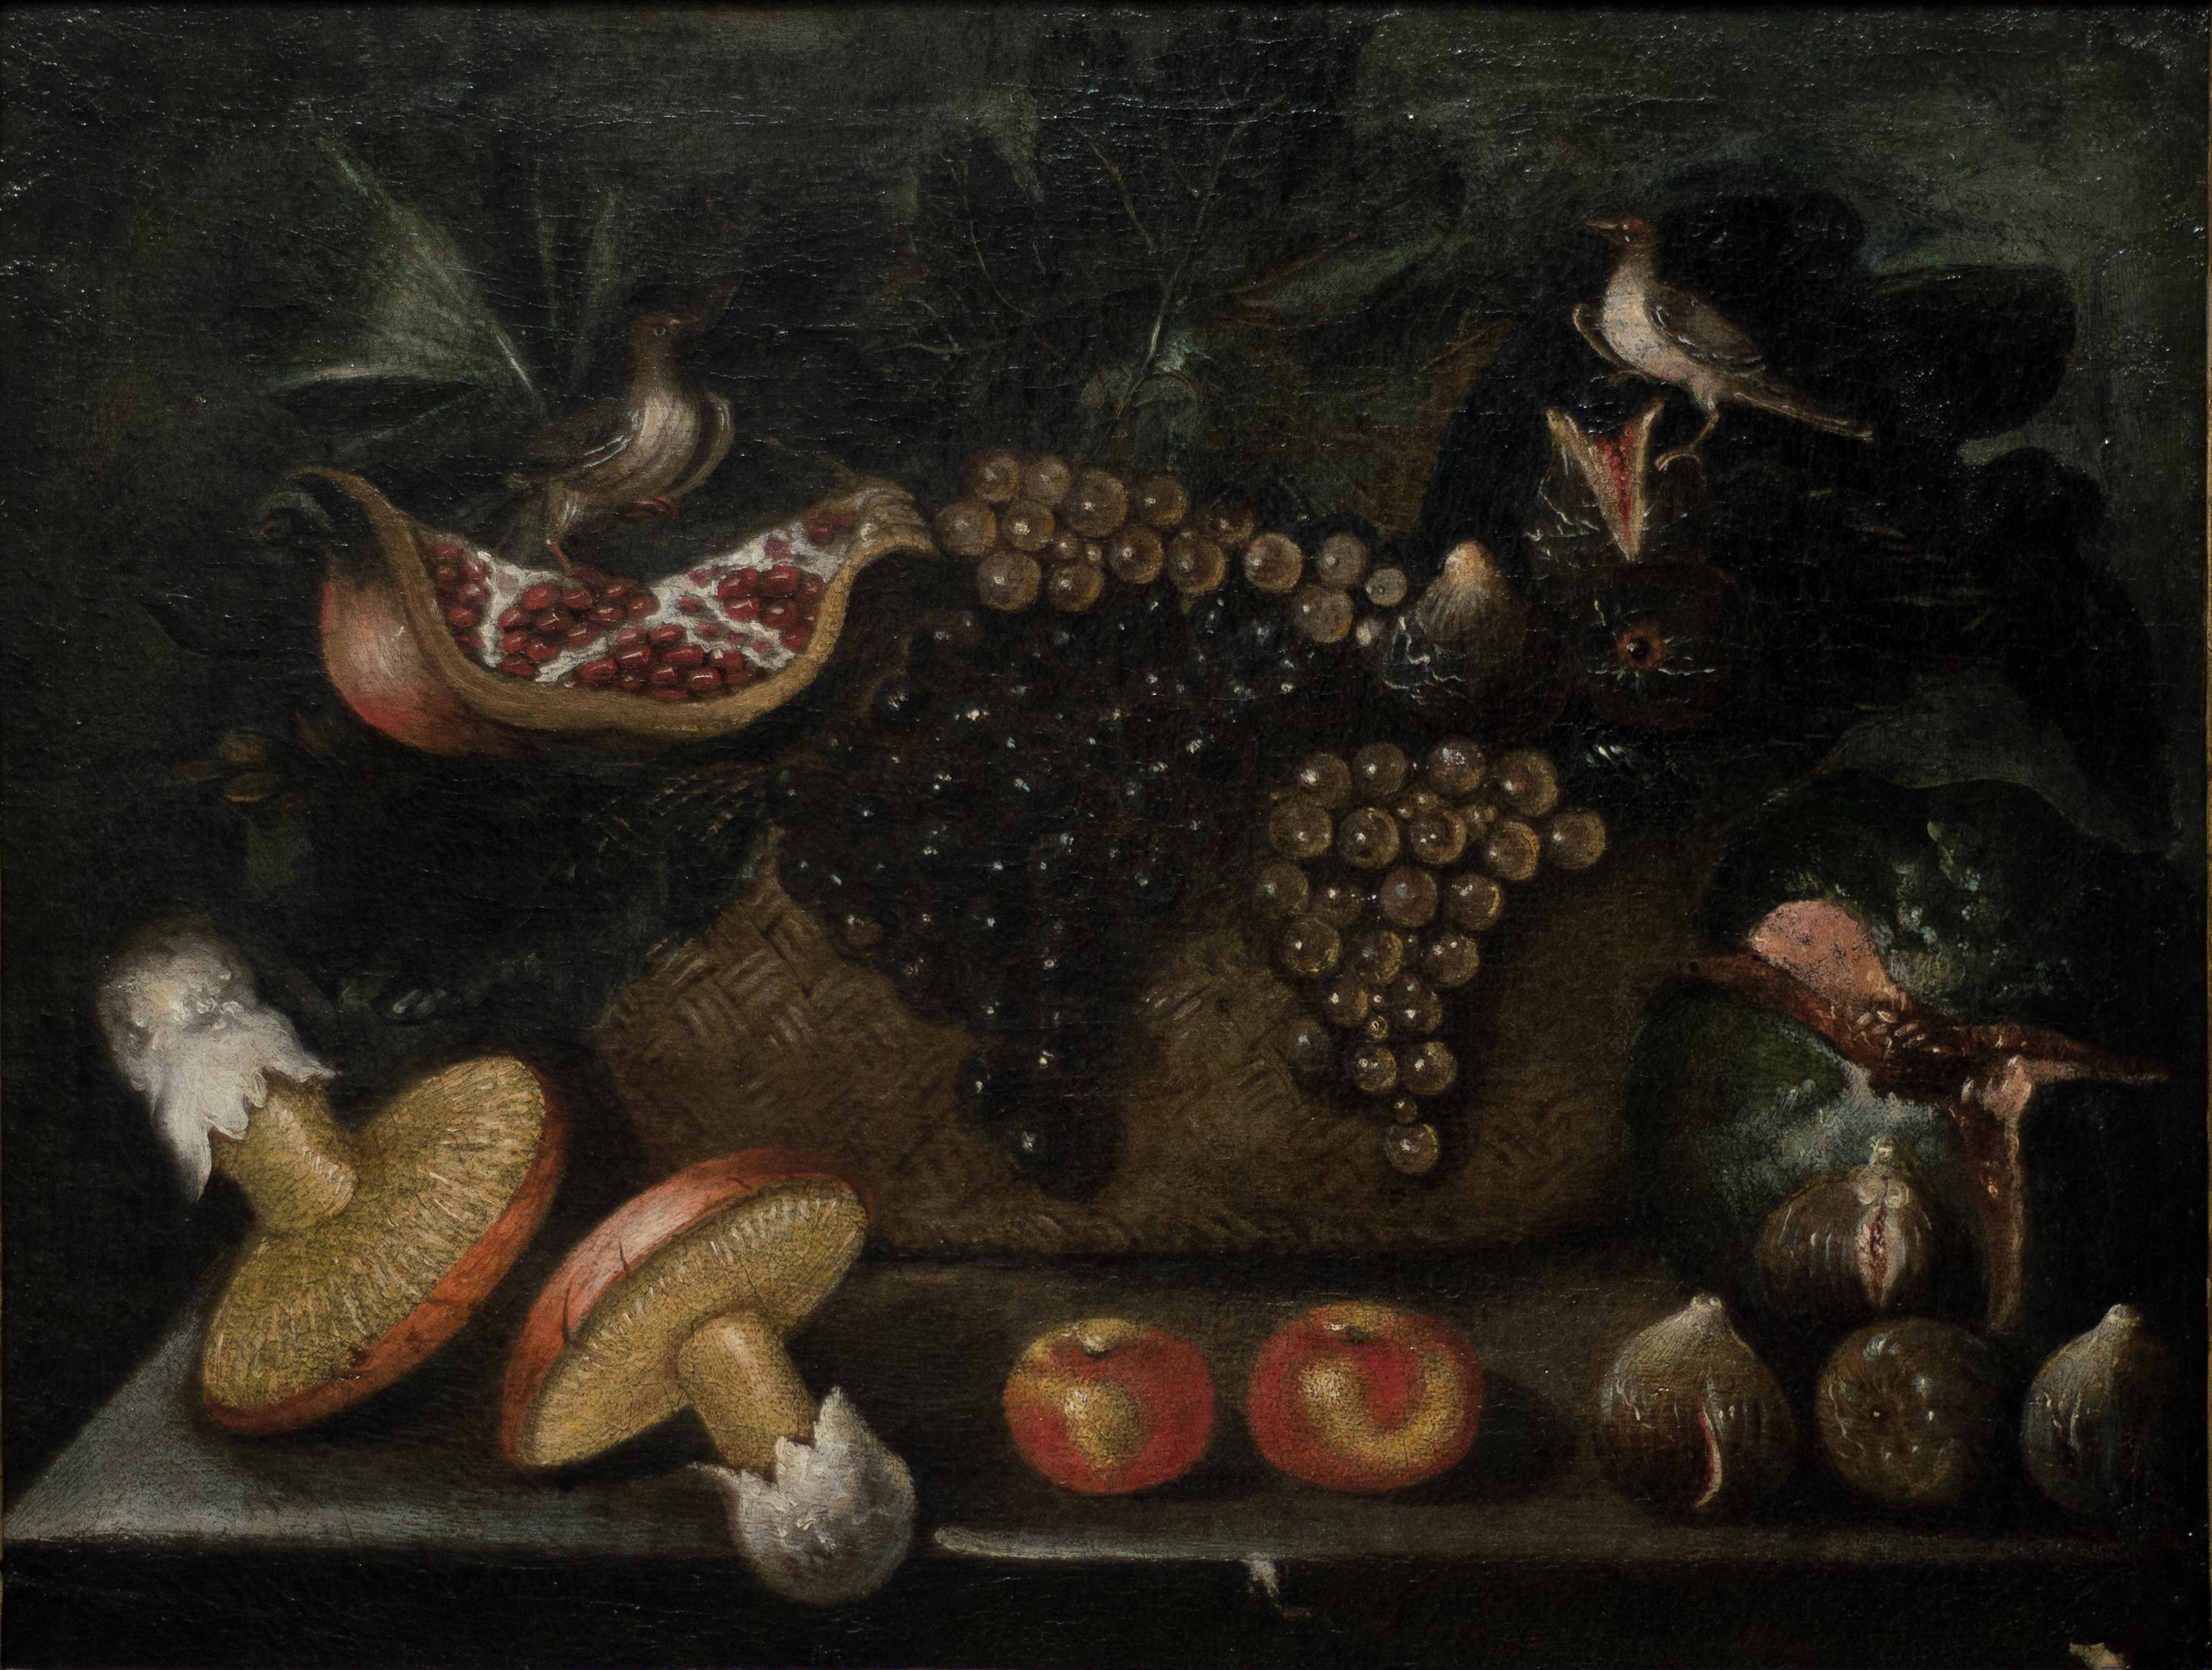 Unknown Figurative Painting - Fruit Basket with Mushrooms and Little Birds, by 17th Century Master